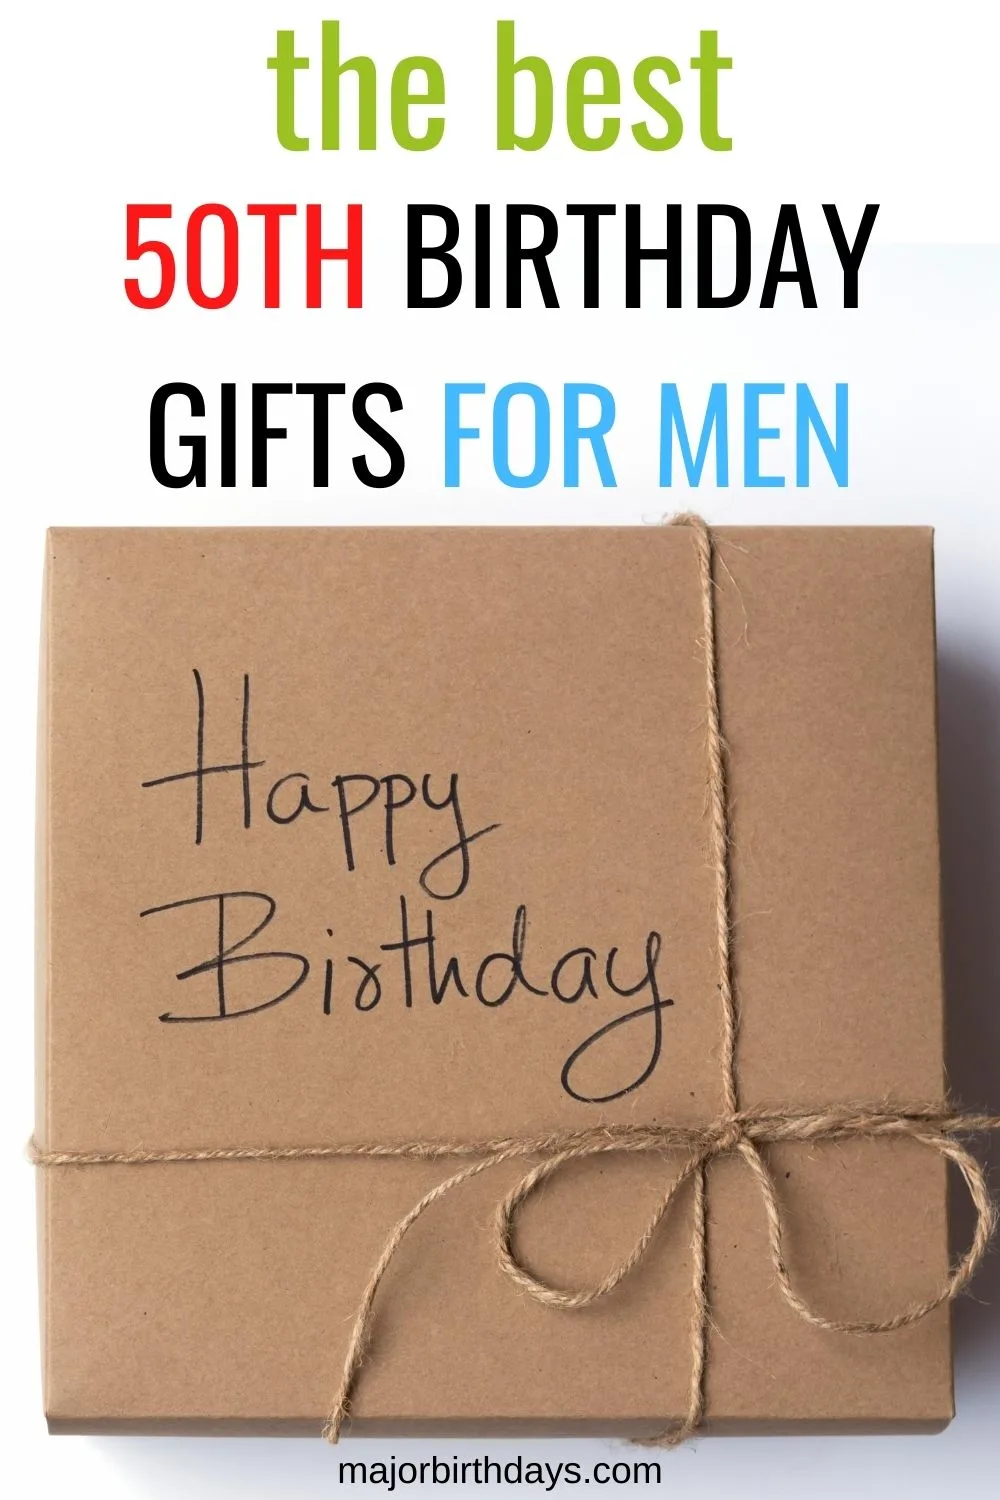 The best 50th birthday gifts for men